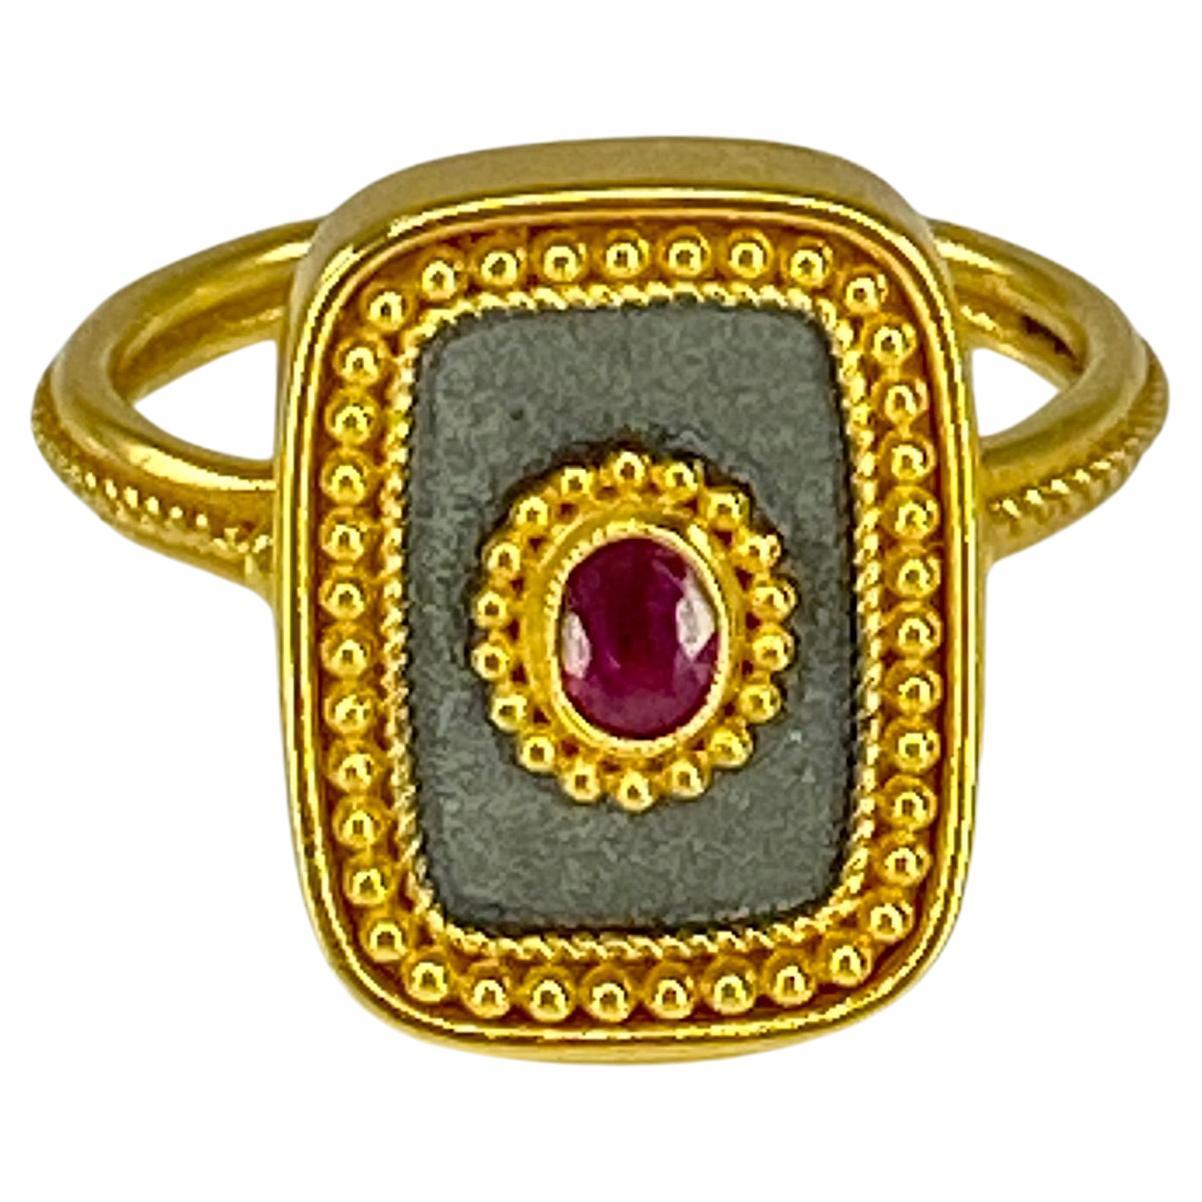 This S.Georgios designer ring is handmade from solid 18 Karat Yellow Gold and is microscopically decorated with Byzantine-style granulation work creating a stunning art piece. This beautiful long ring features an elegant center oval-cut natural Ruby